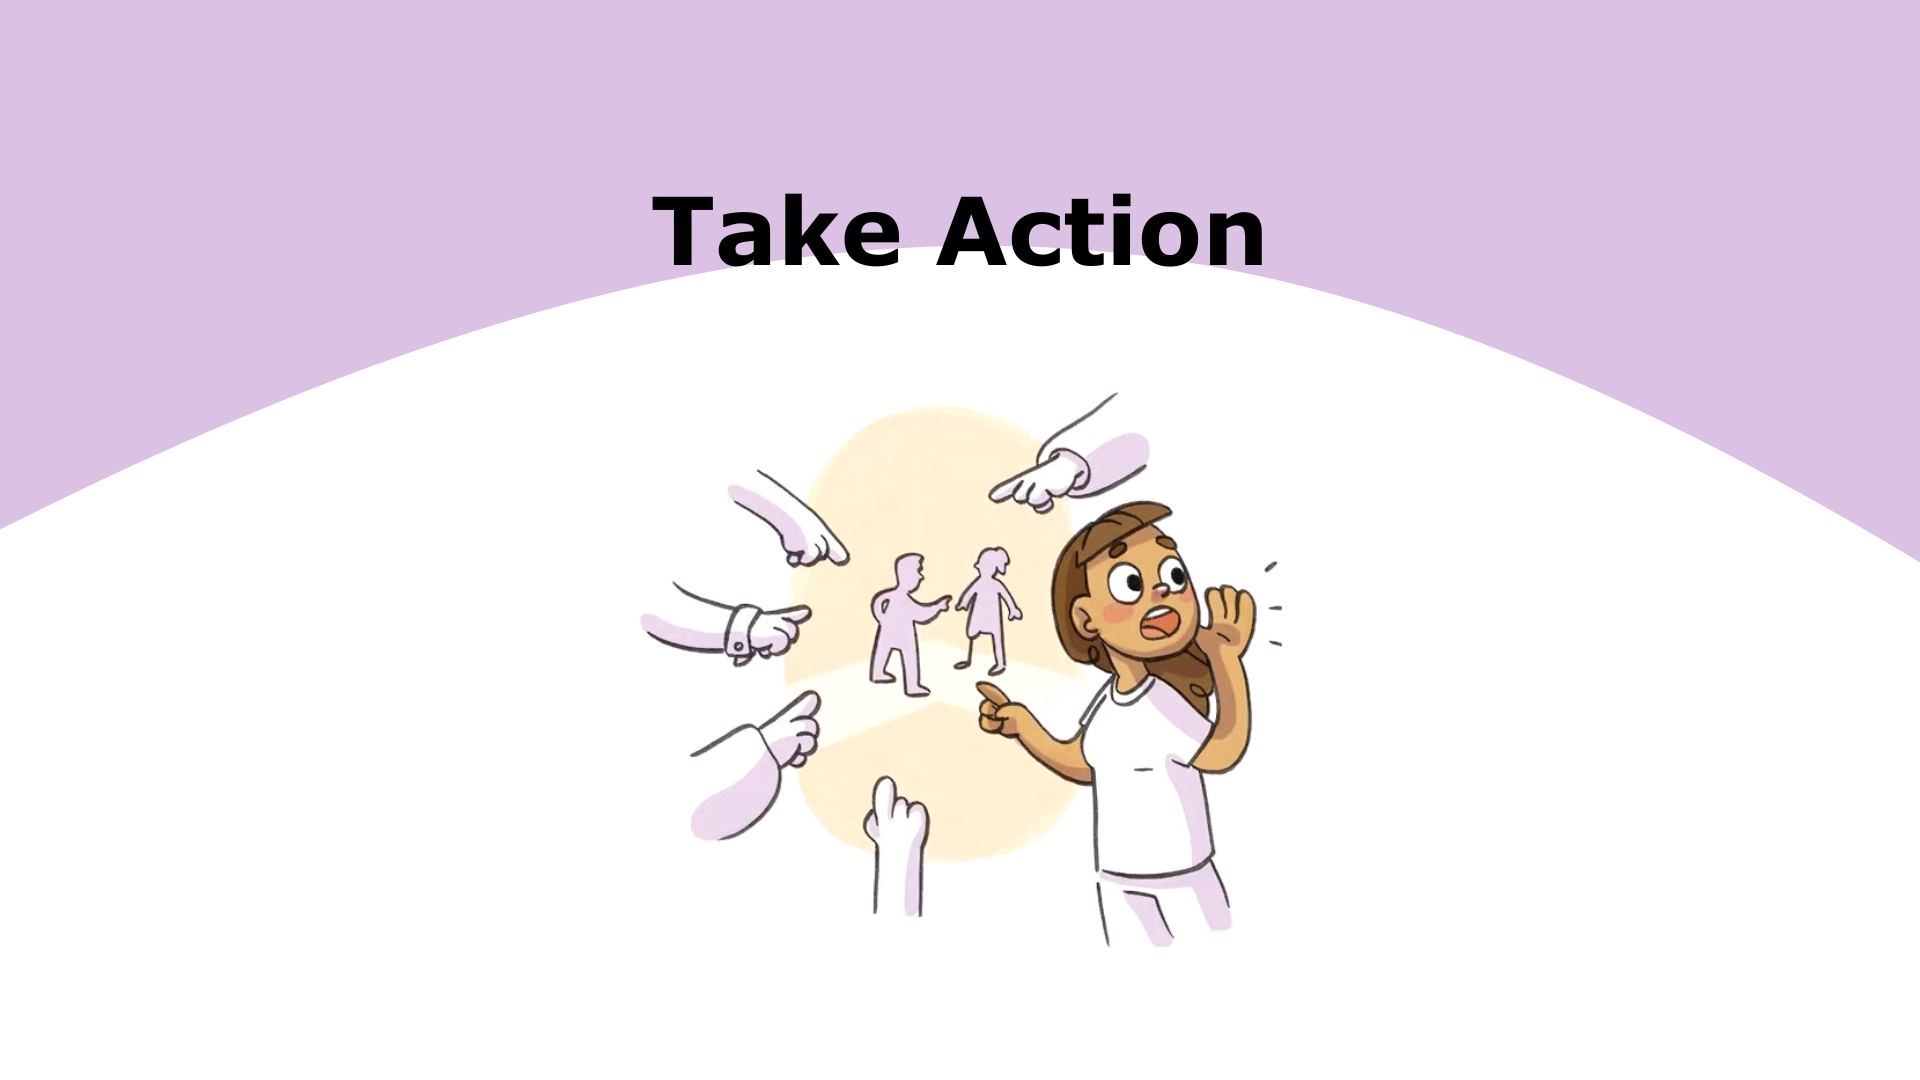 Purple and white tile. Text says "Take Action".